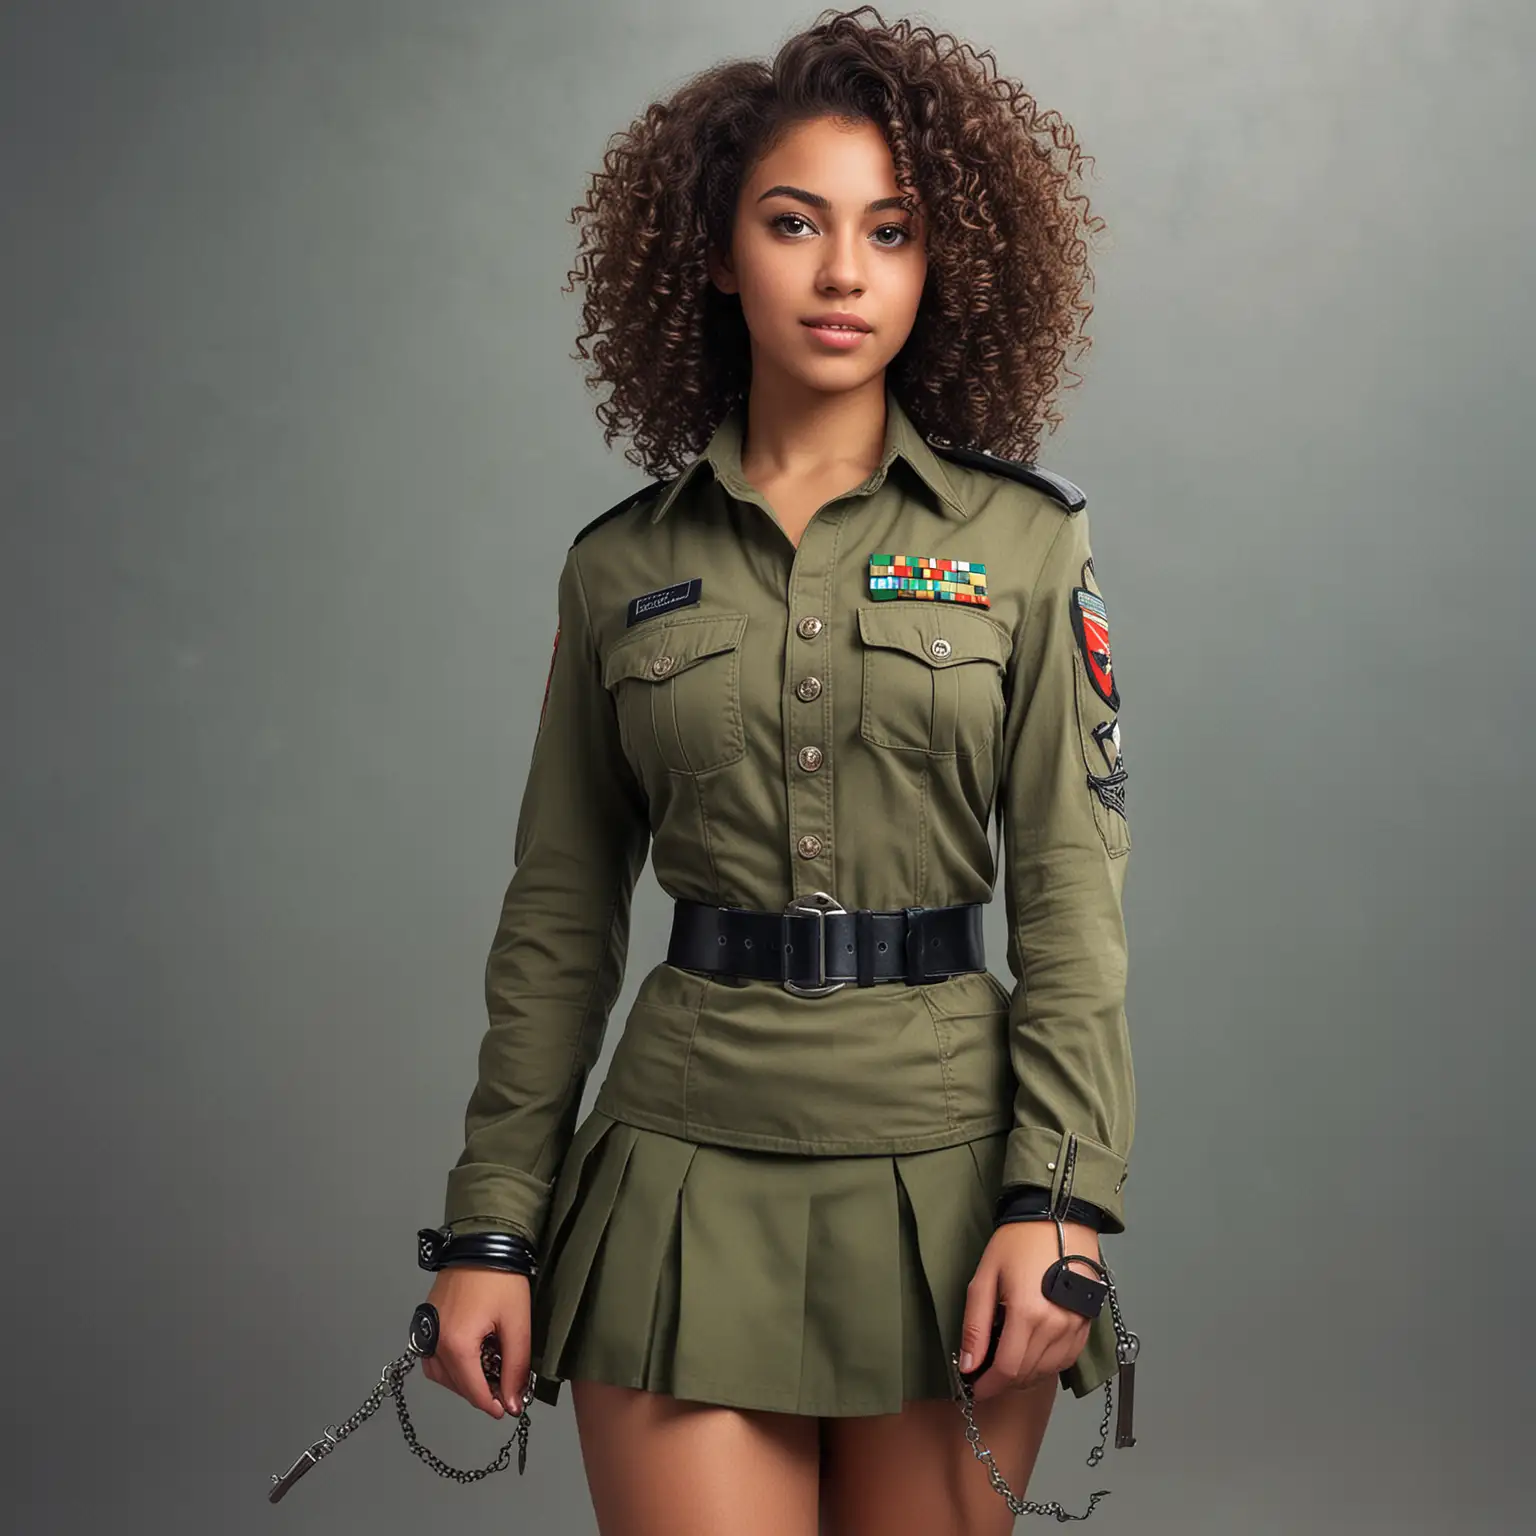 A 20-year-old giantess with dark skin and curly hair in military attire, including a military skirt, show her handcuff people